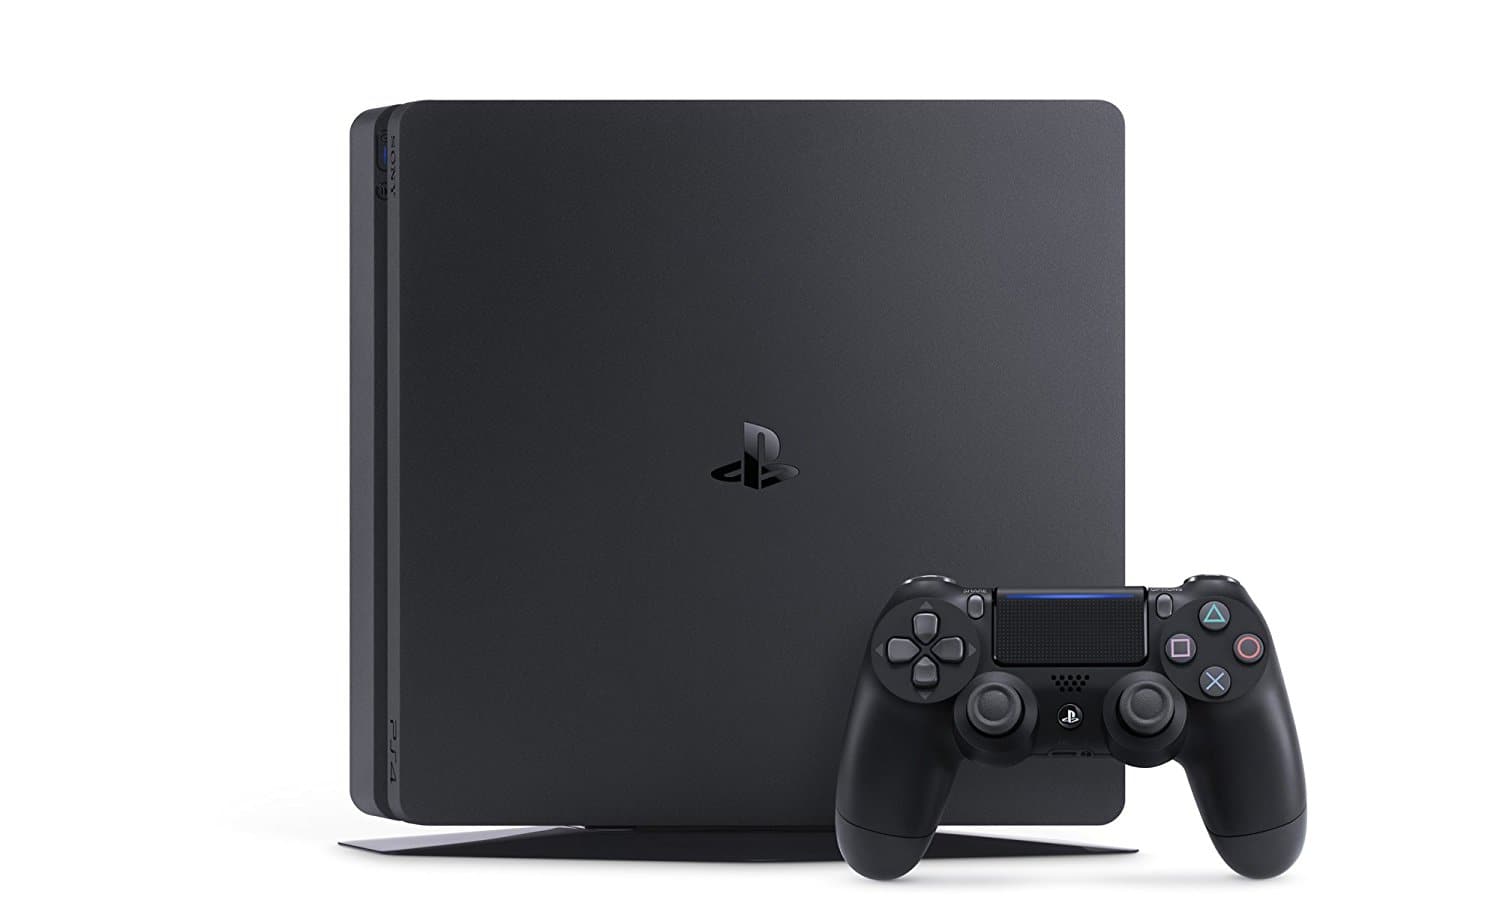 Used]The PlayStation 4 body jet Black 500GB (CUH-2200A B01) PS3, PS4 body  Suzuka monopoly 059-1808012-01YS - BE FORWARD Store